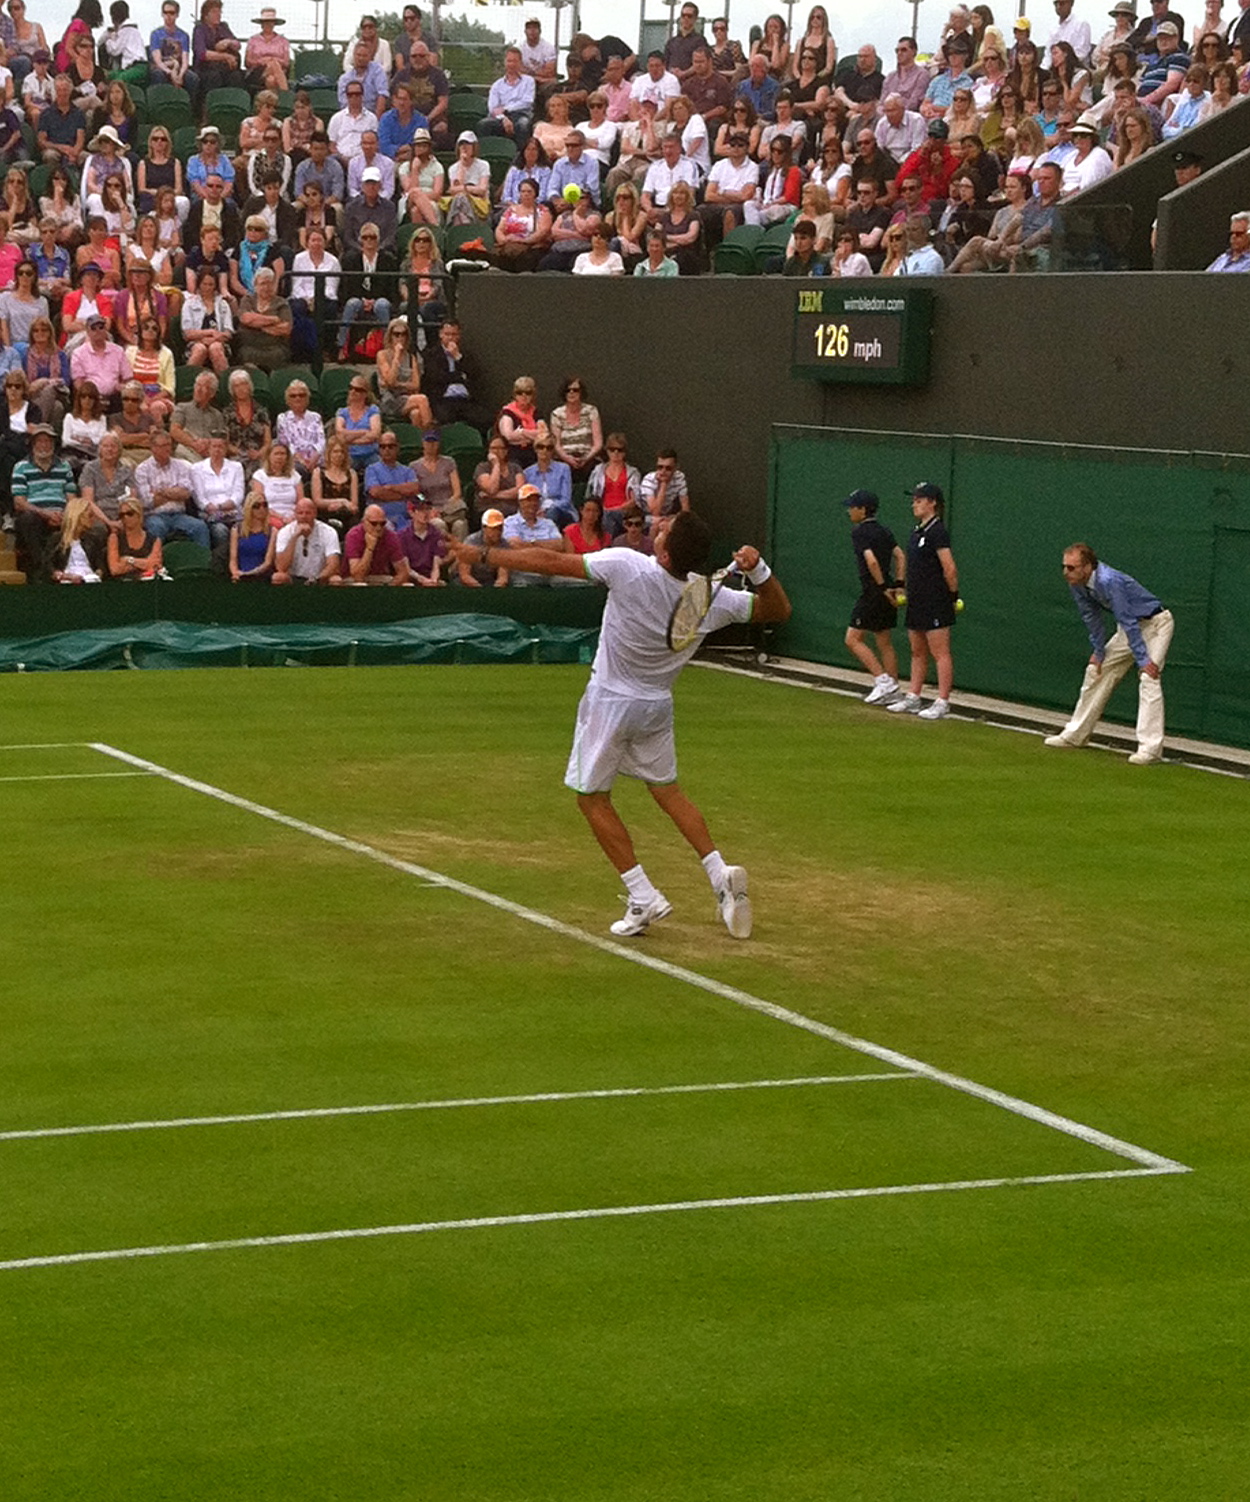 Wimbledon Tennis--Completely worth the lack of sleep and hours standing in the 